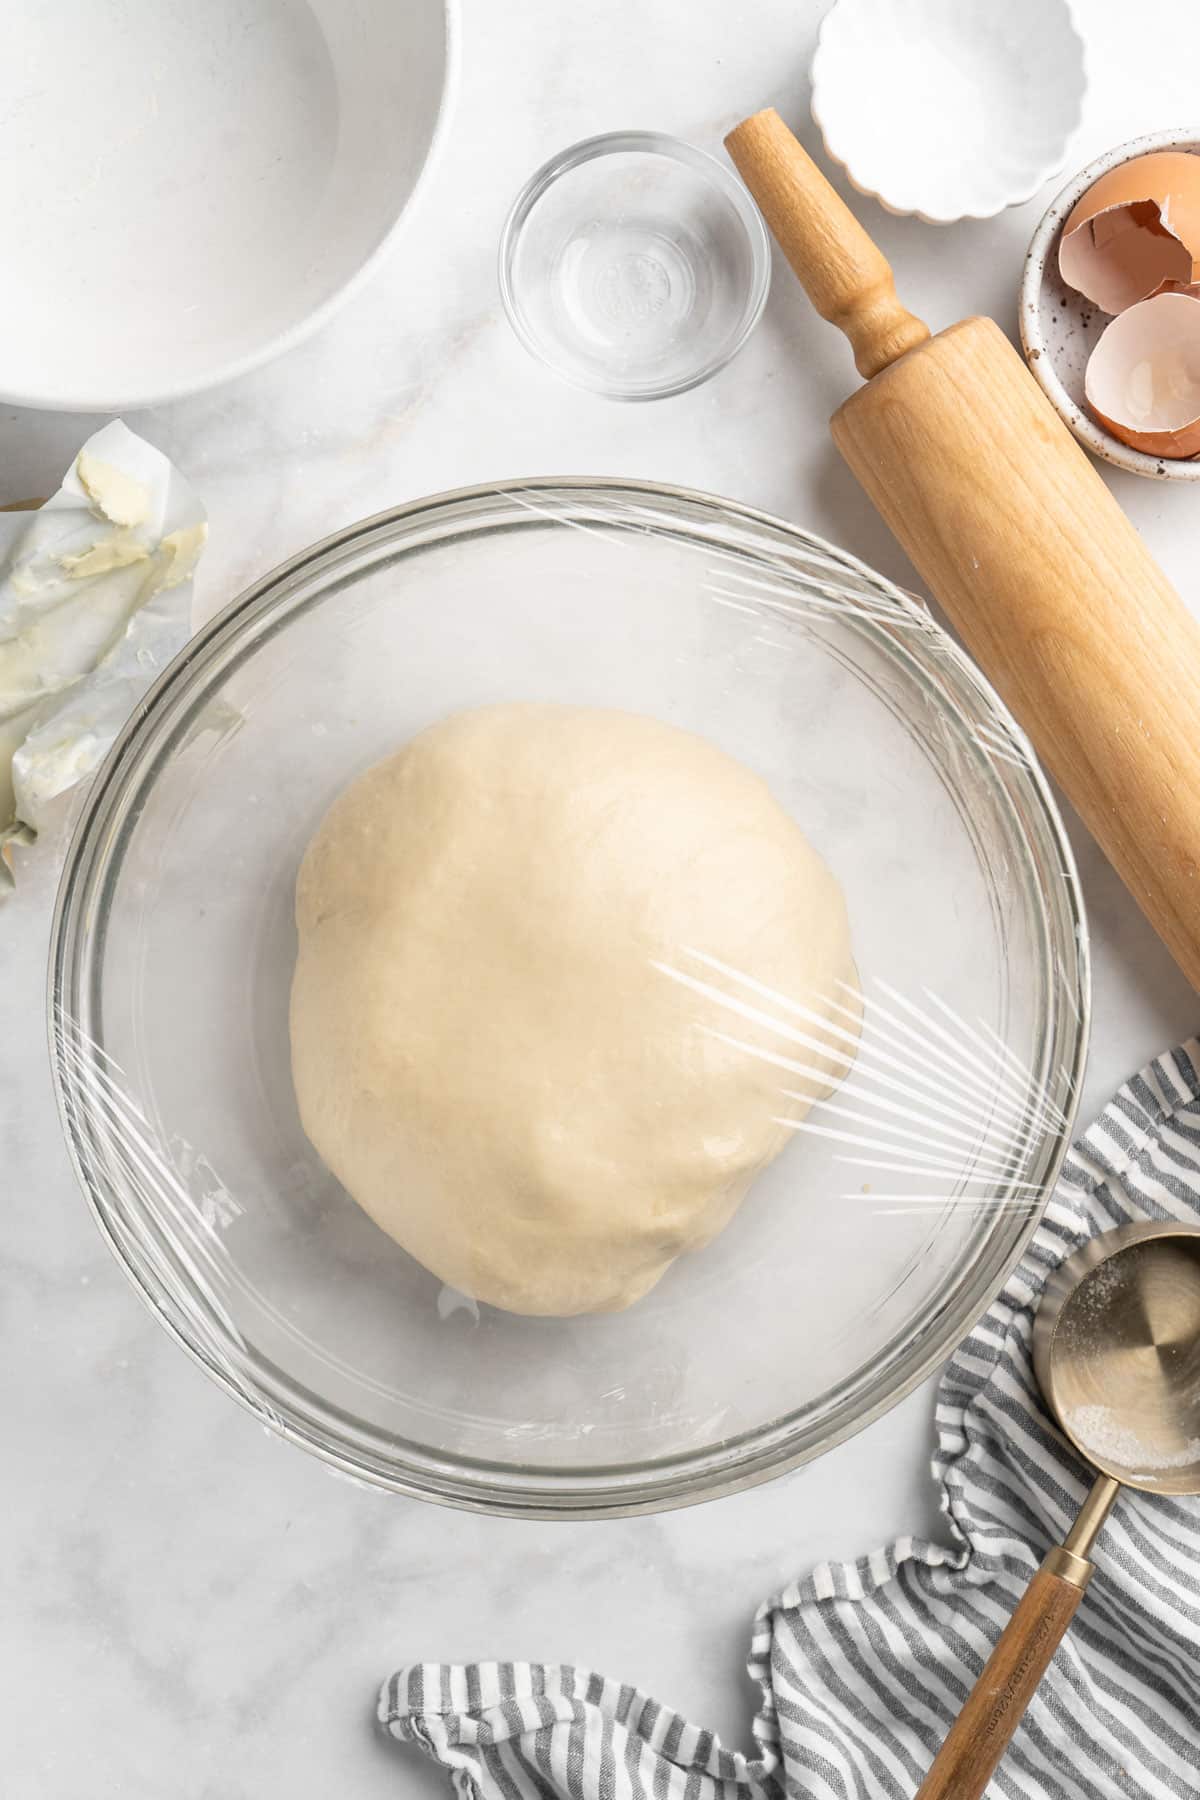 Covering dough ball in a bowl with plastic wrap.